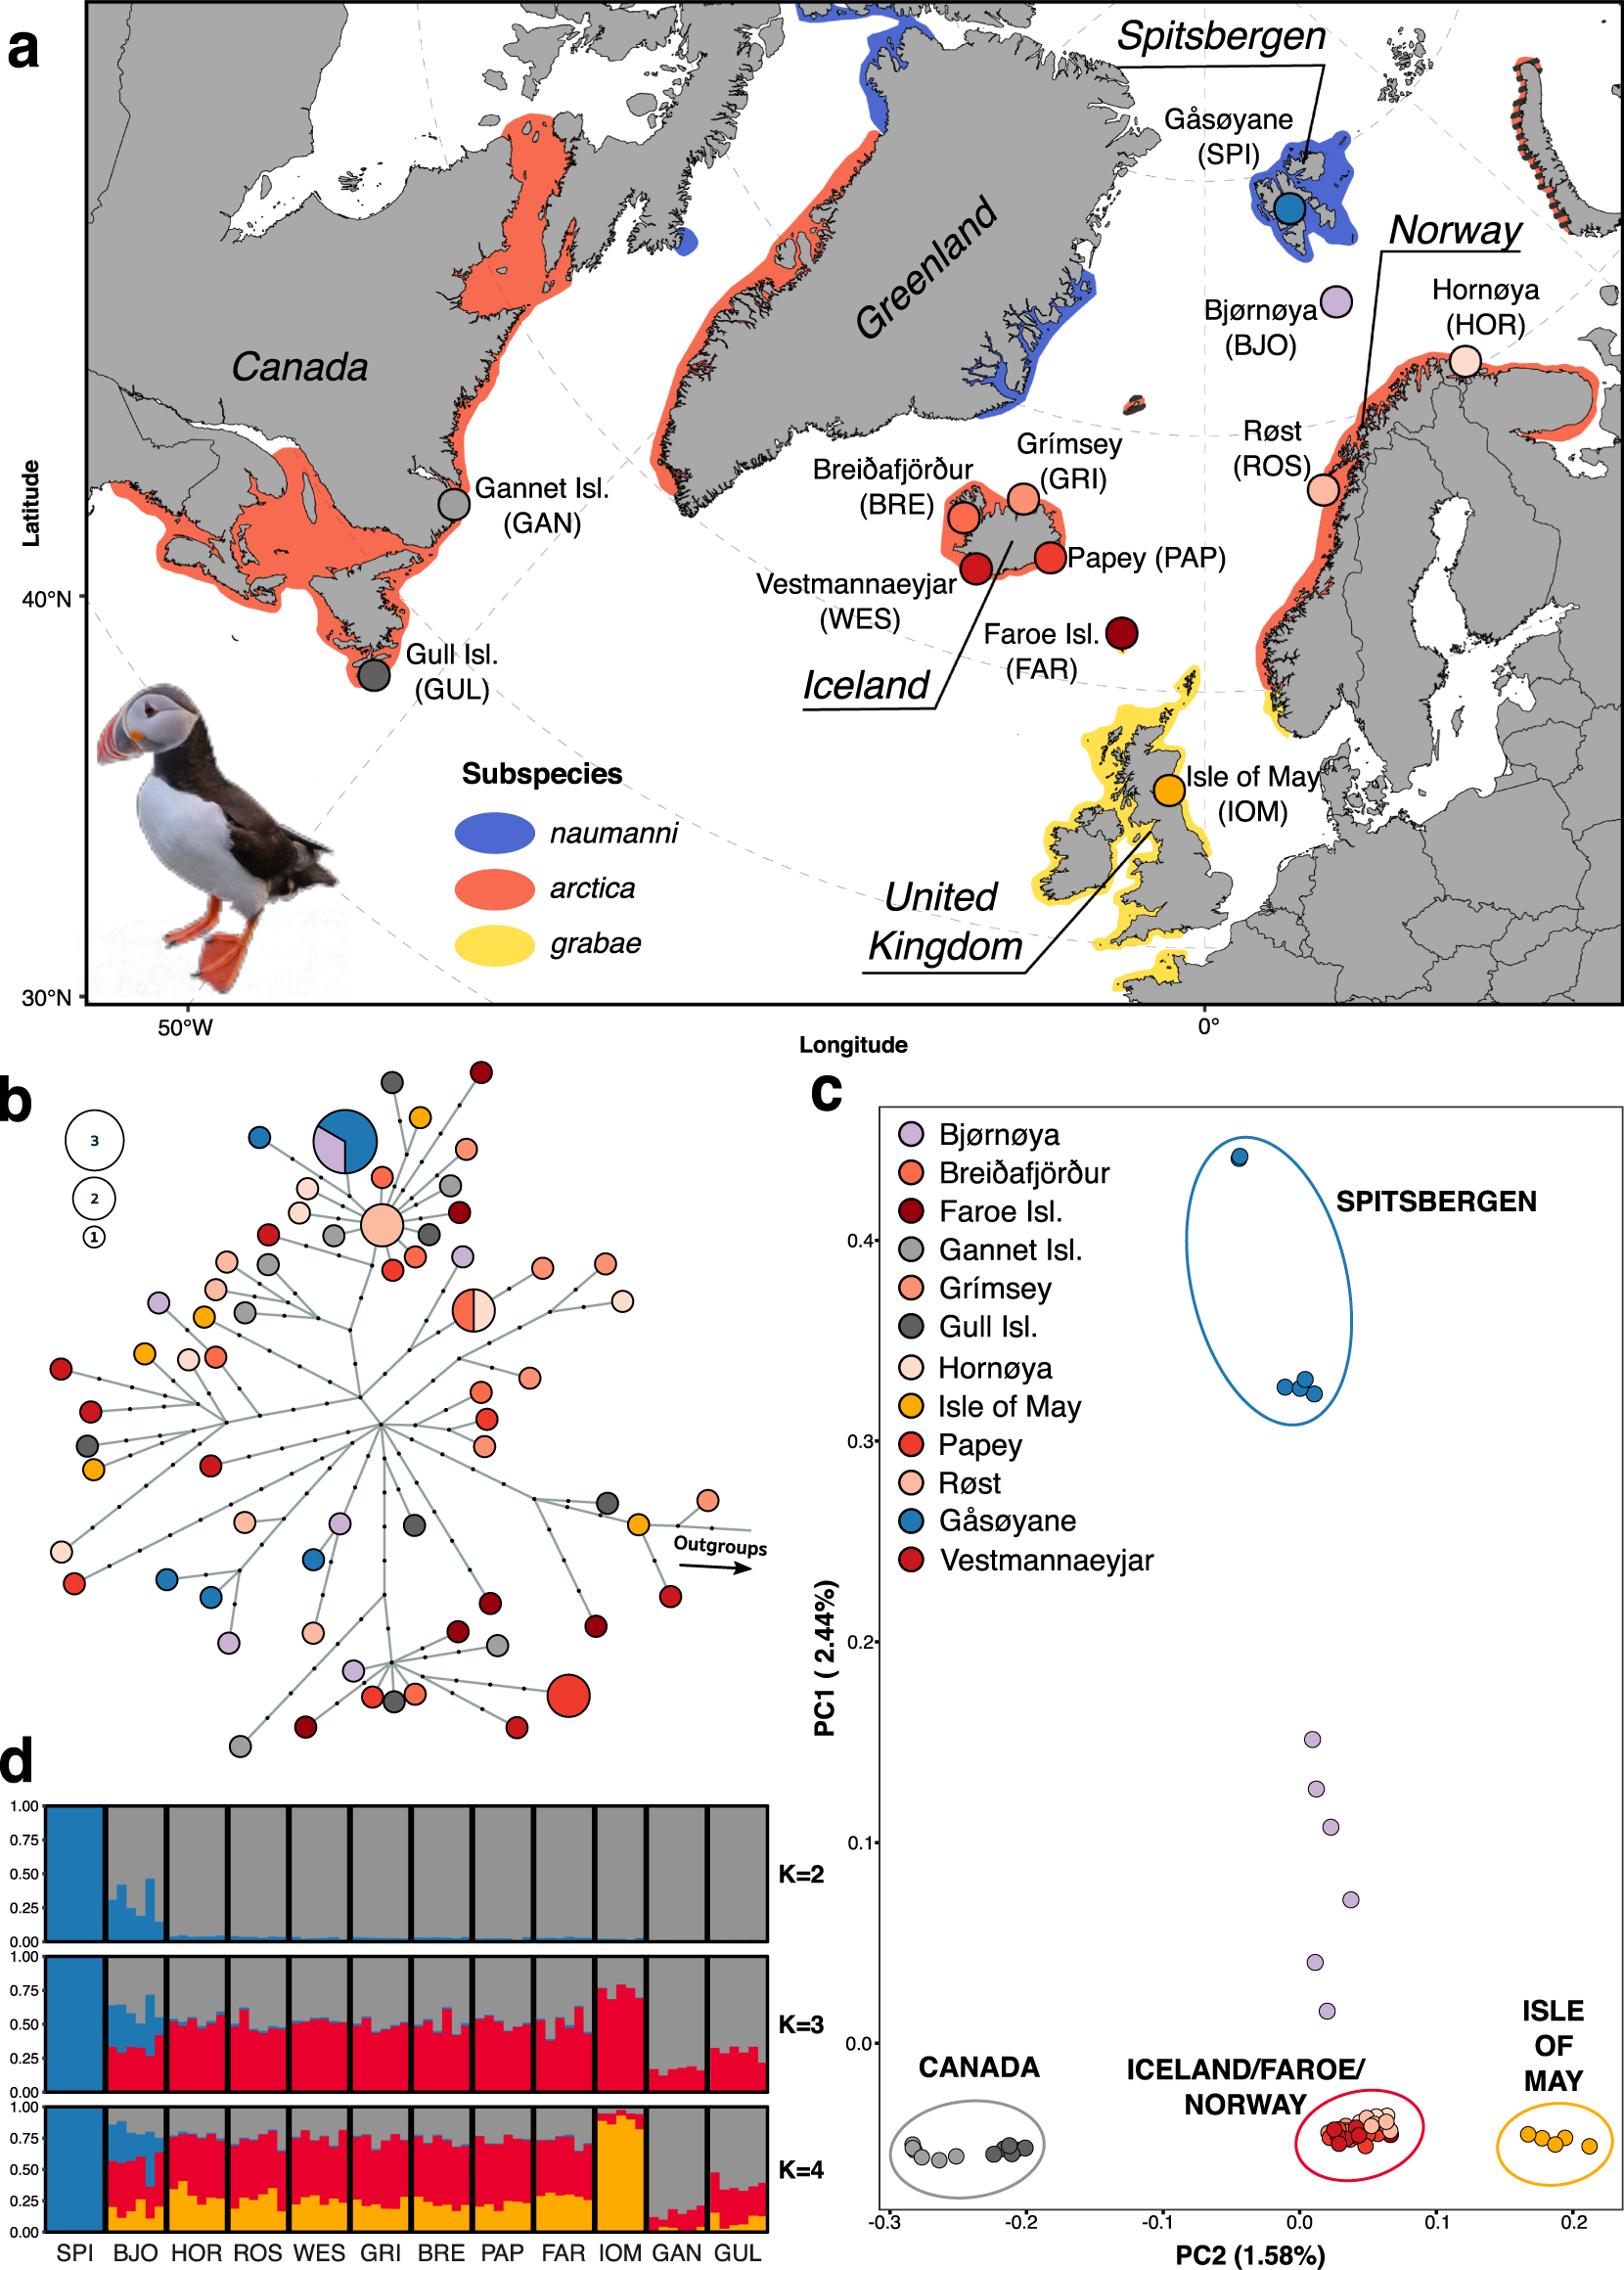 New Species of Puffin Evolved in Response to Climate Change